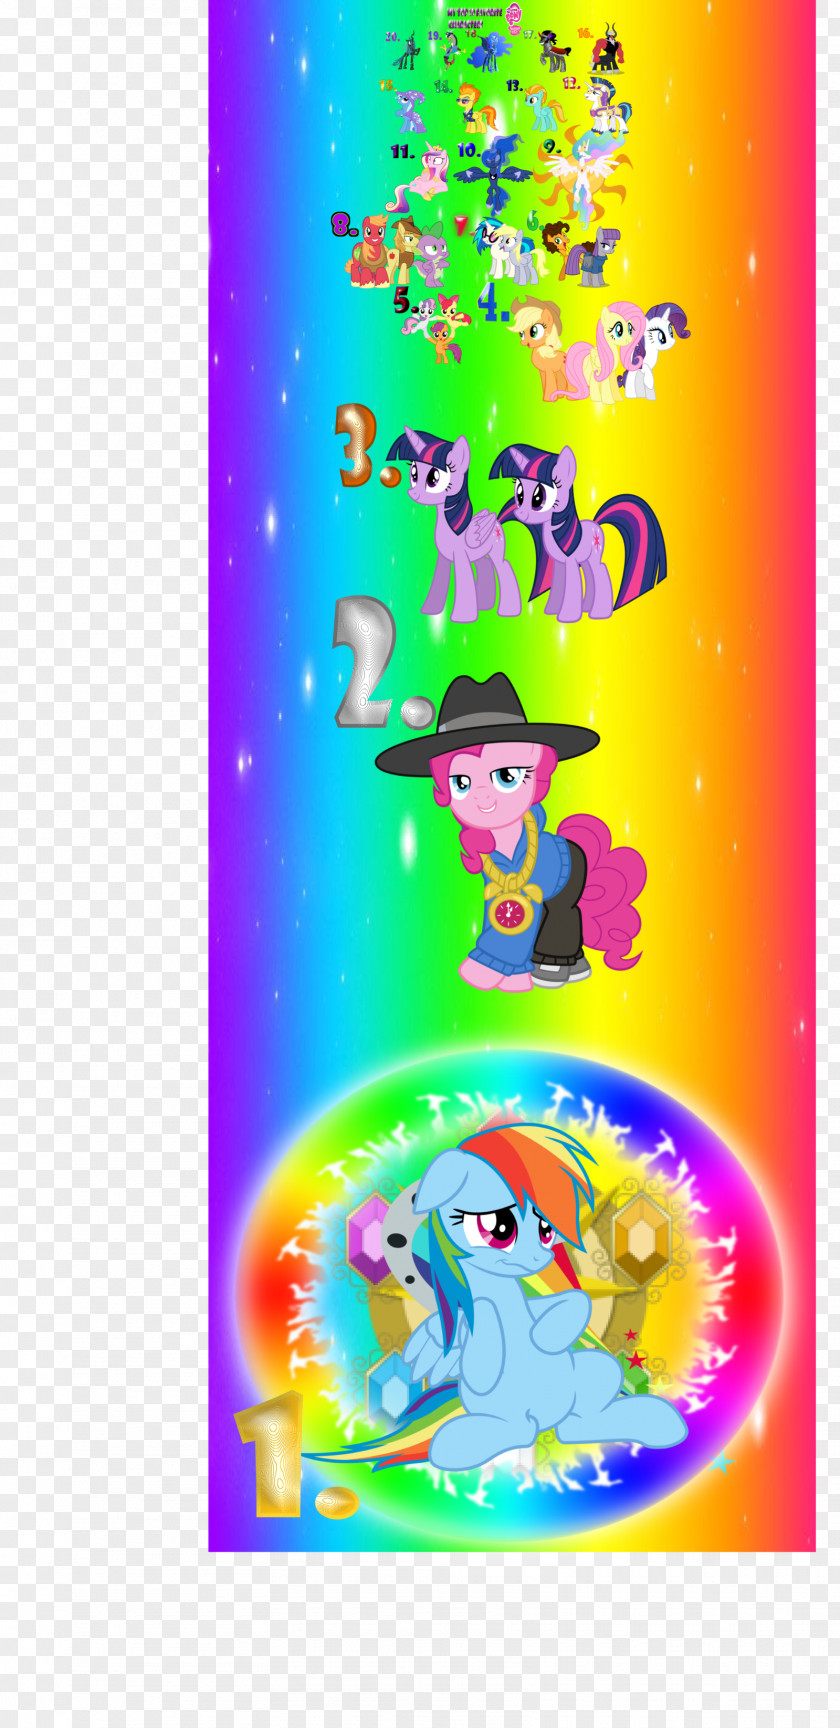 Season 7 Cat Graphic DesignLasers Illustration My Little Pony: Friendship Is Magic PNG